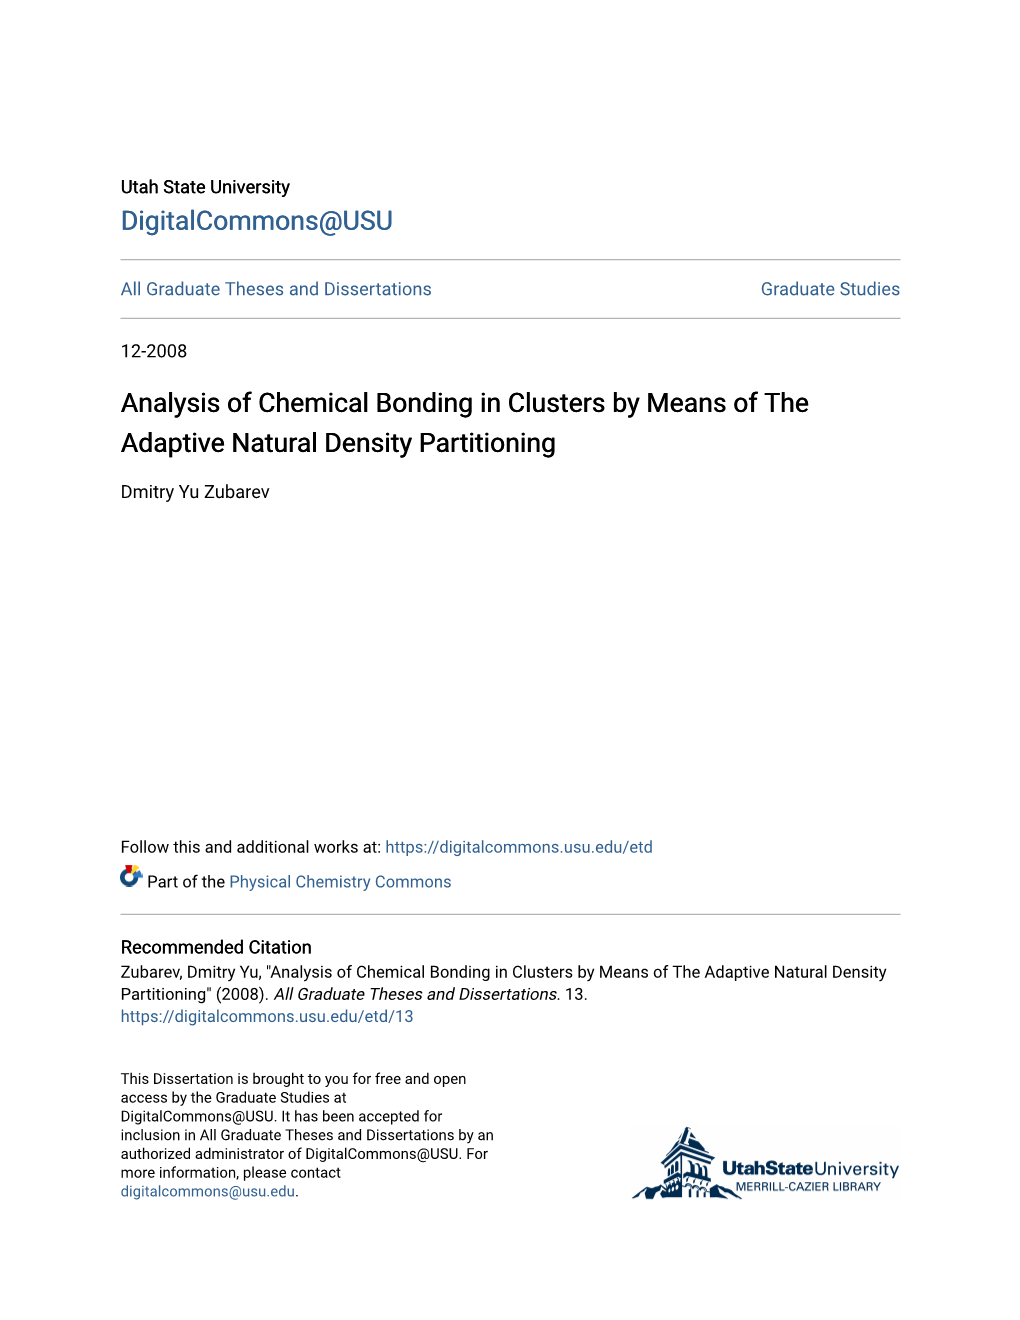 Analysis of Chemical Bonding in Clusters by Means of the Adaptive Natural Density Partitioning